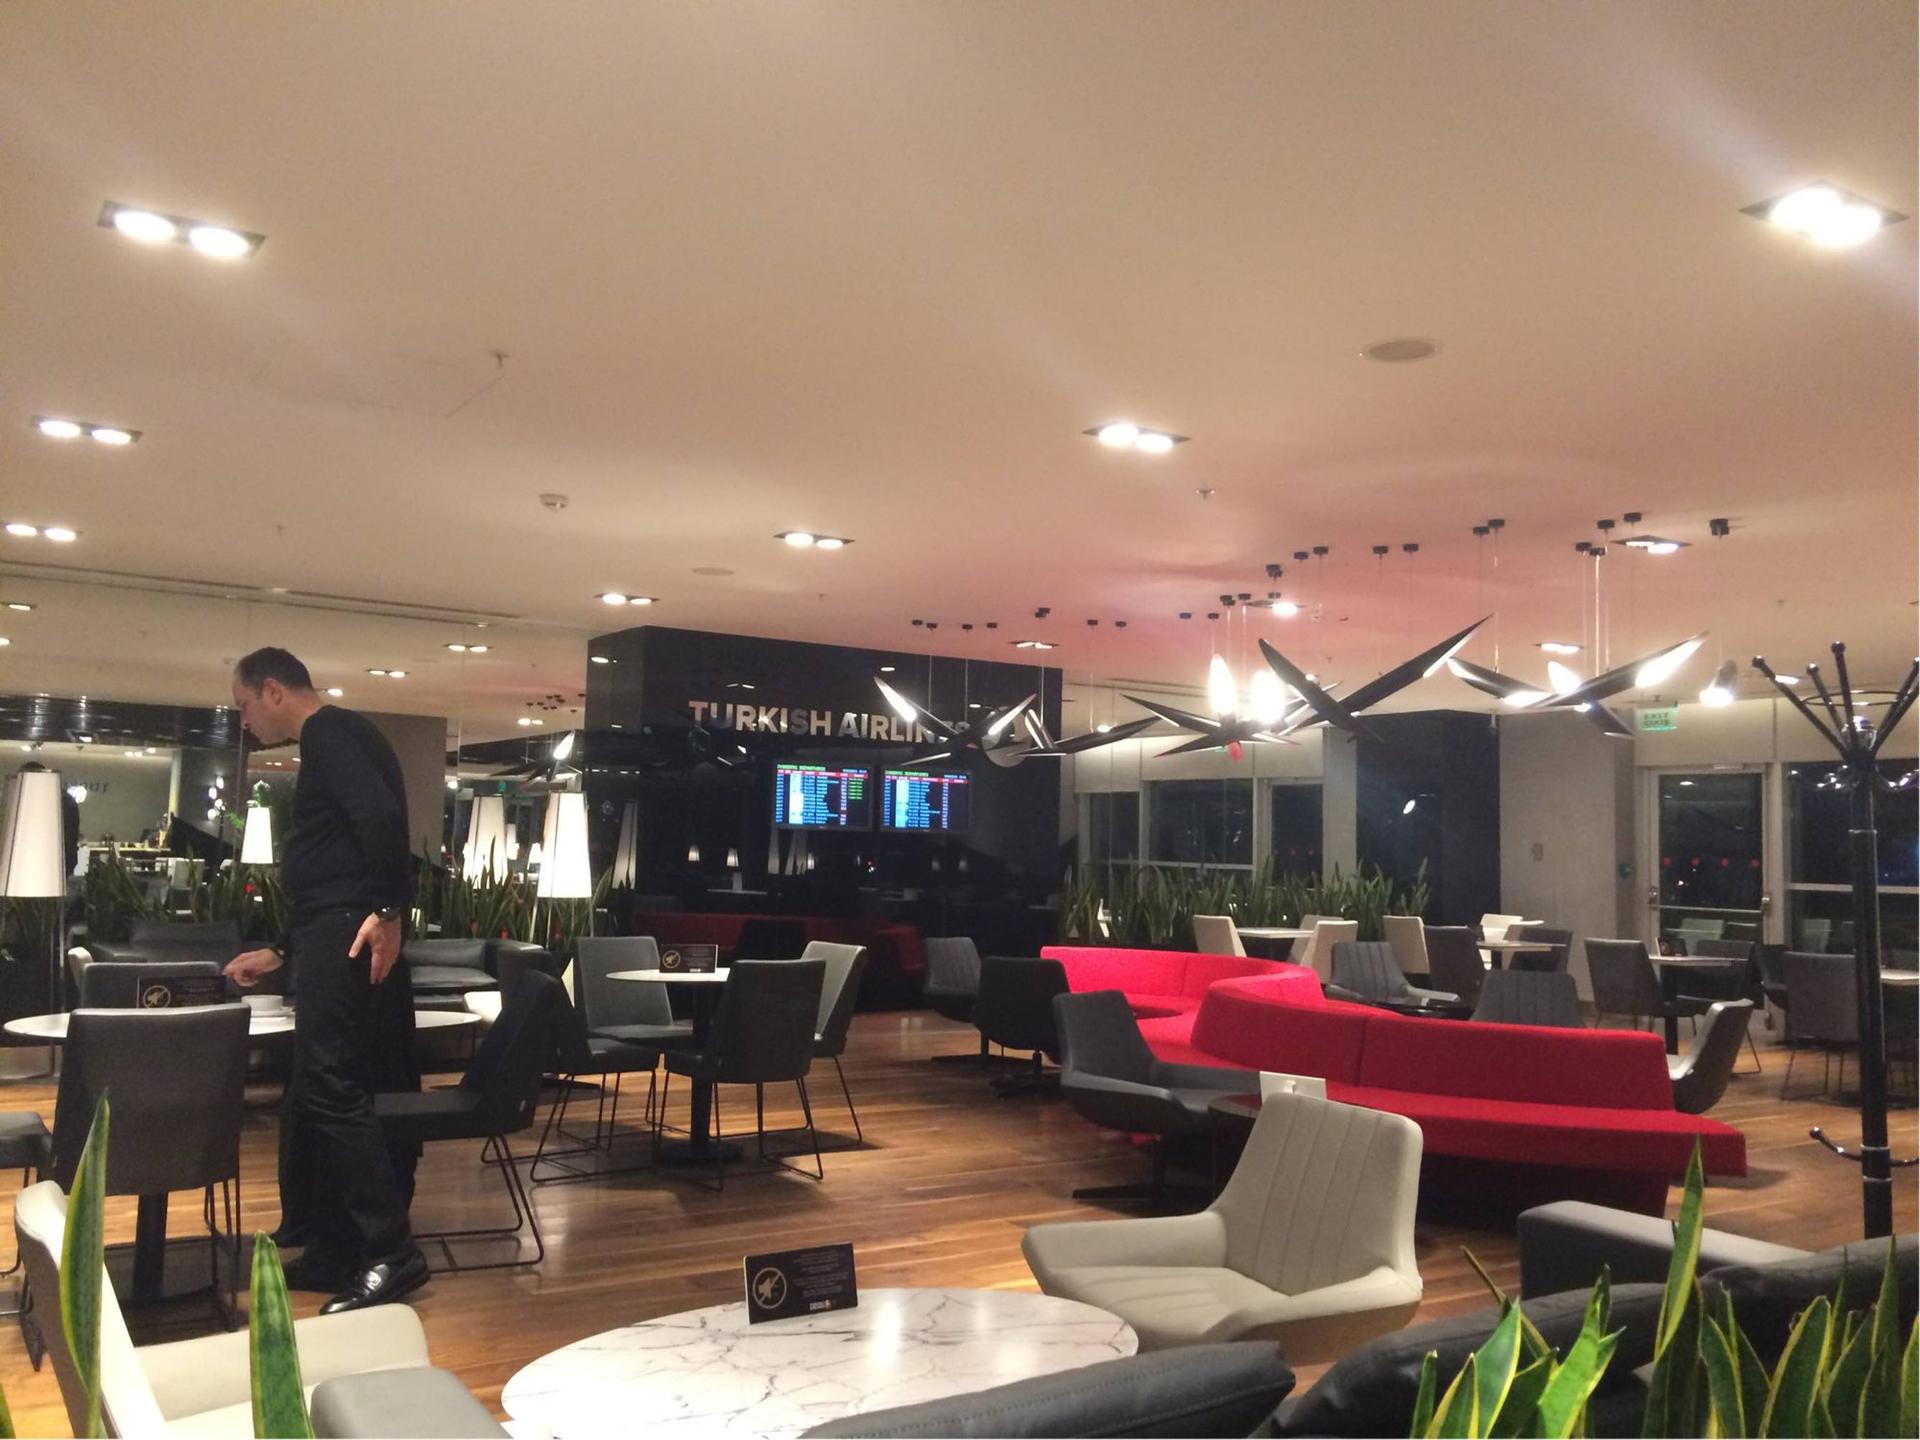 Turkish Airlines CIP Lounge (Domestic Elite Lounge) image 1 of 1